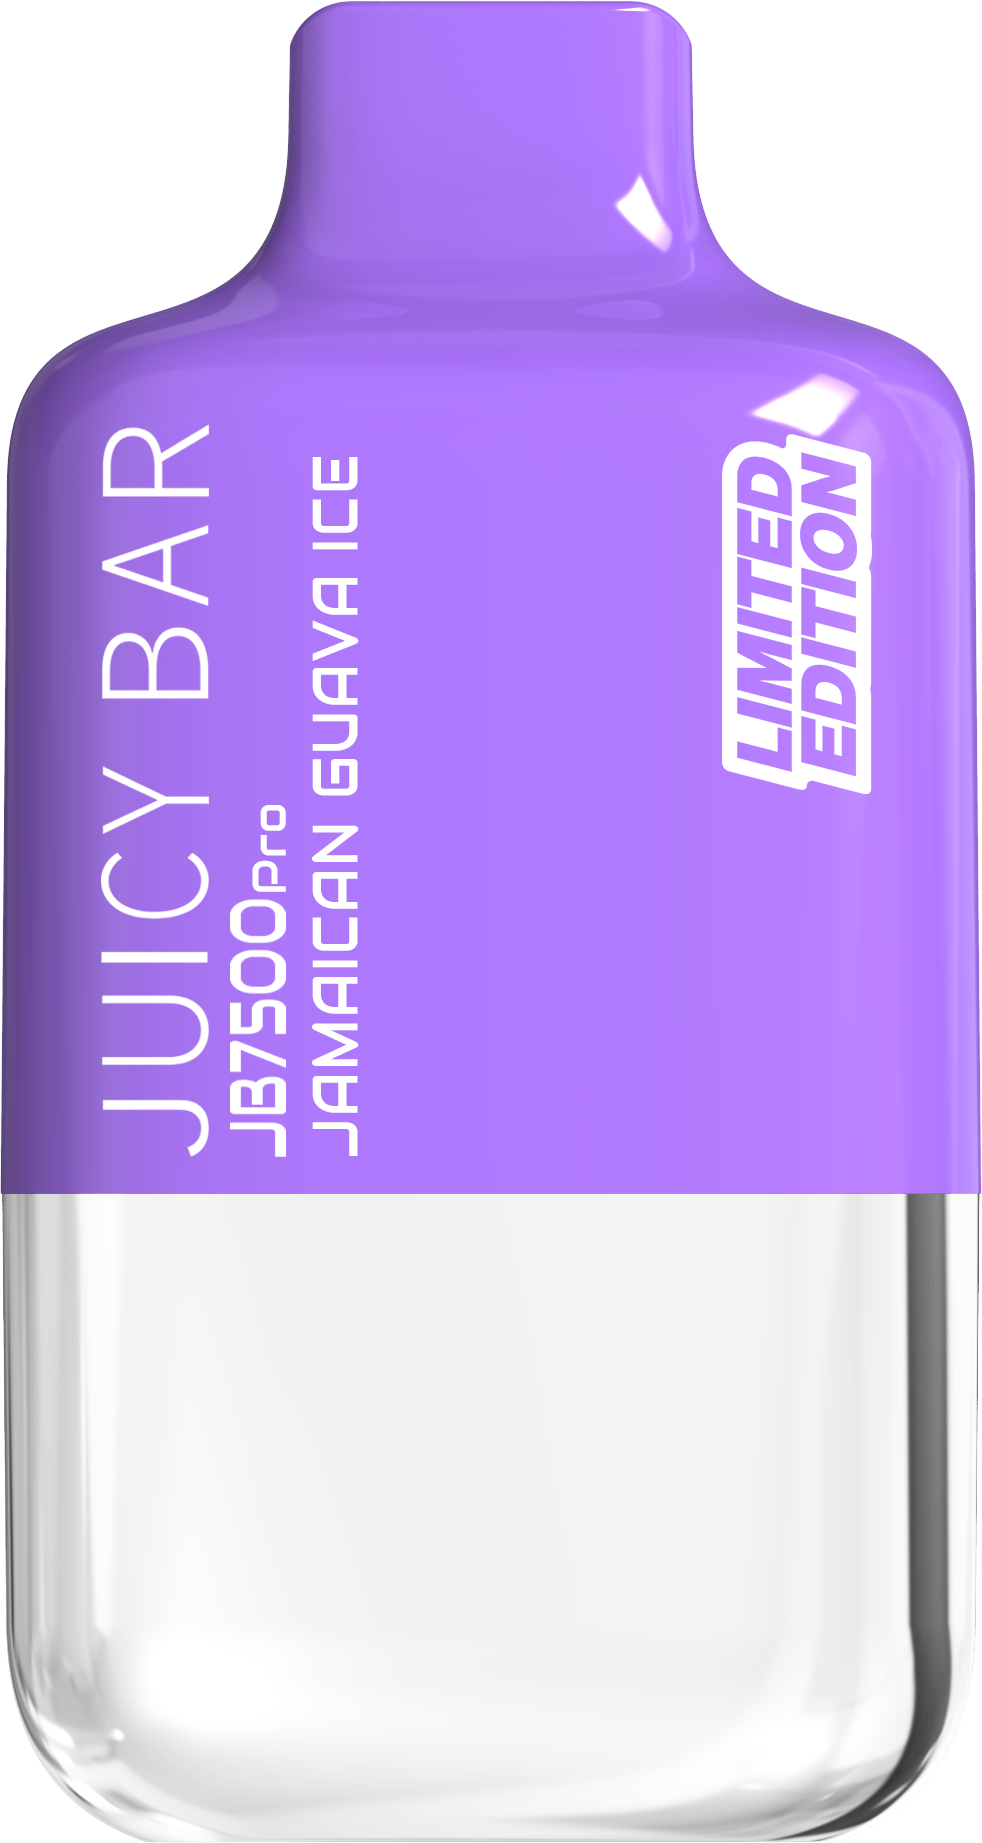 Juicy Bar Pro Edition 7500 Puffs 5% | Jamaican Guava Ice